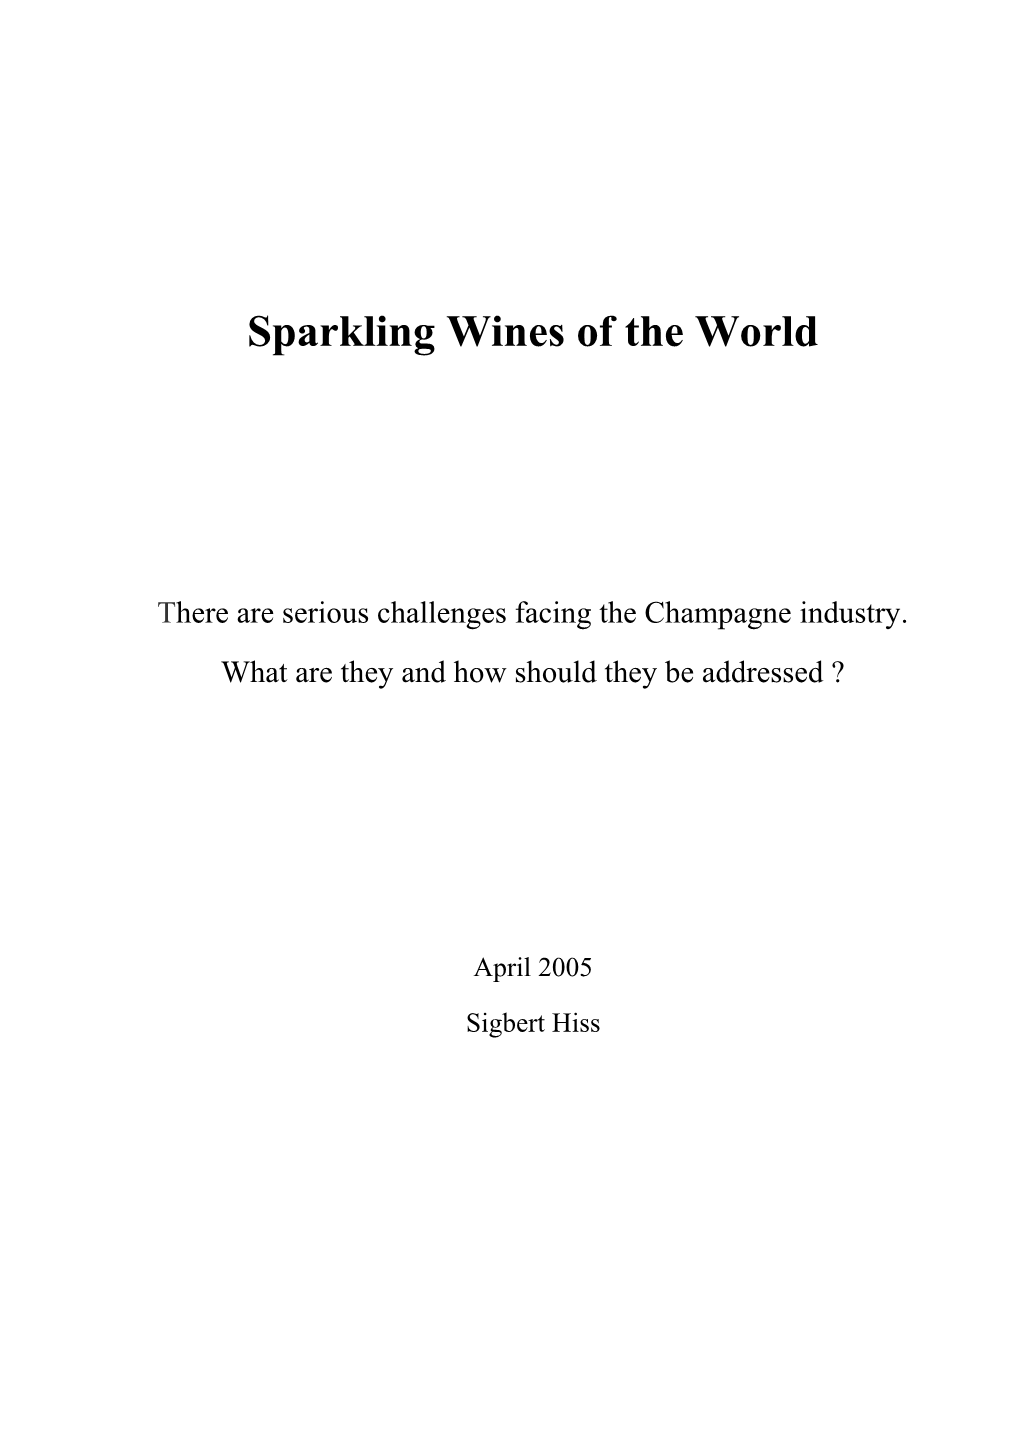 Unit 5 - Sparkling Wines of the World